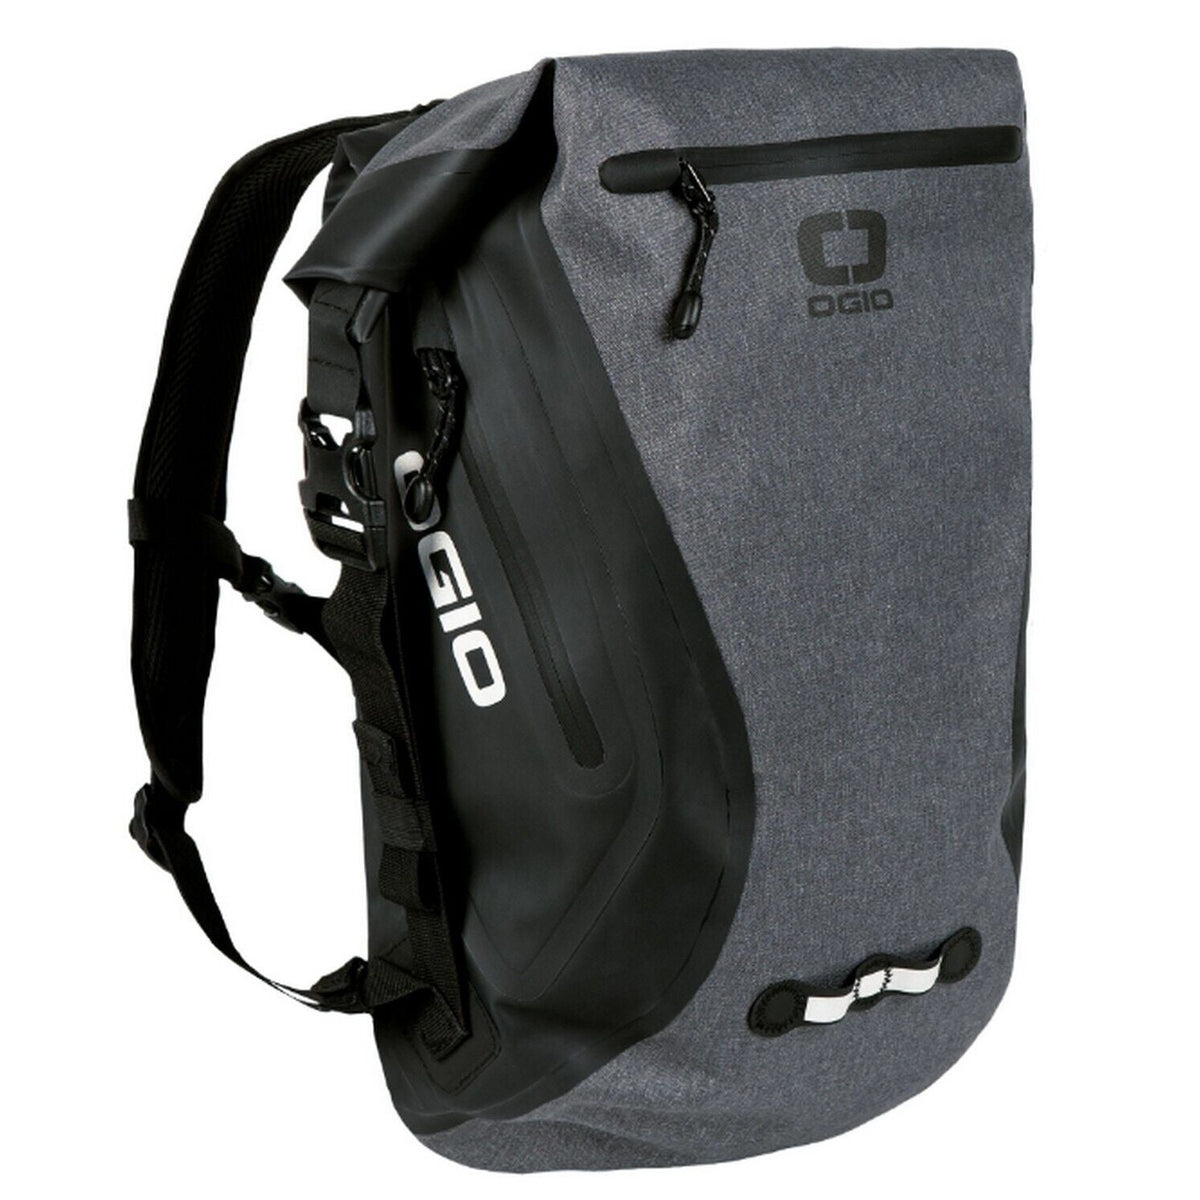 Ogio All Elements Aero-D Backpack